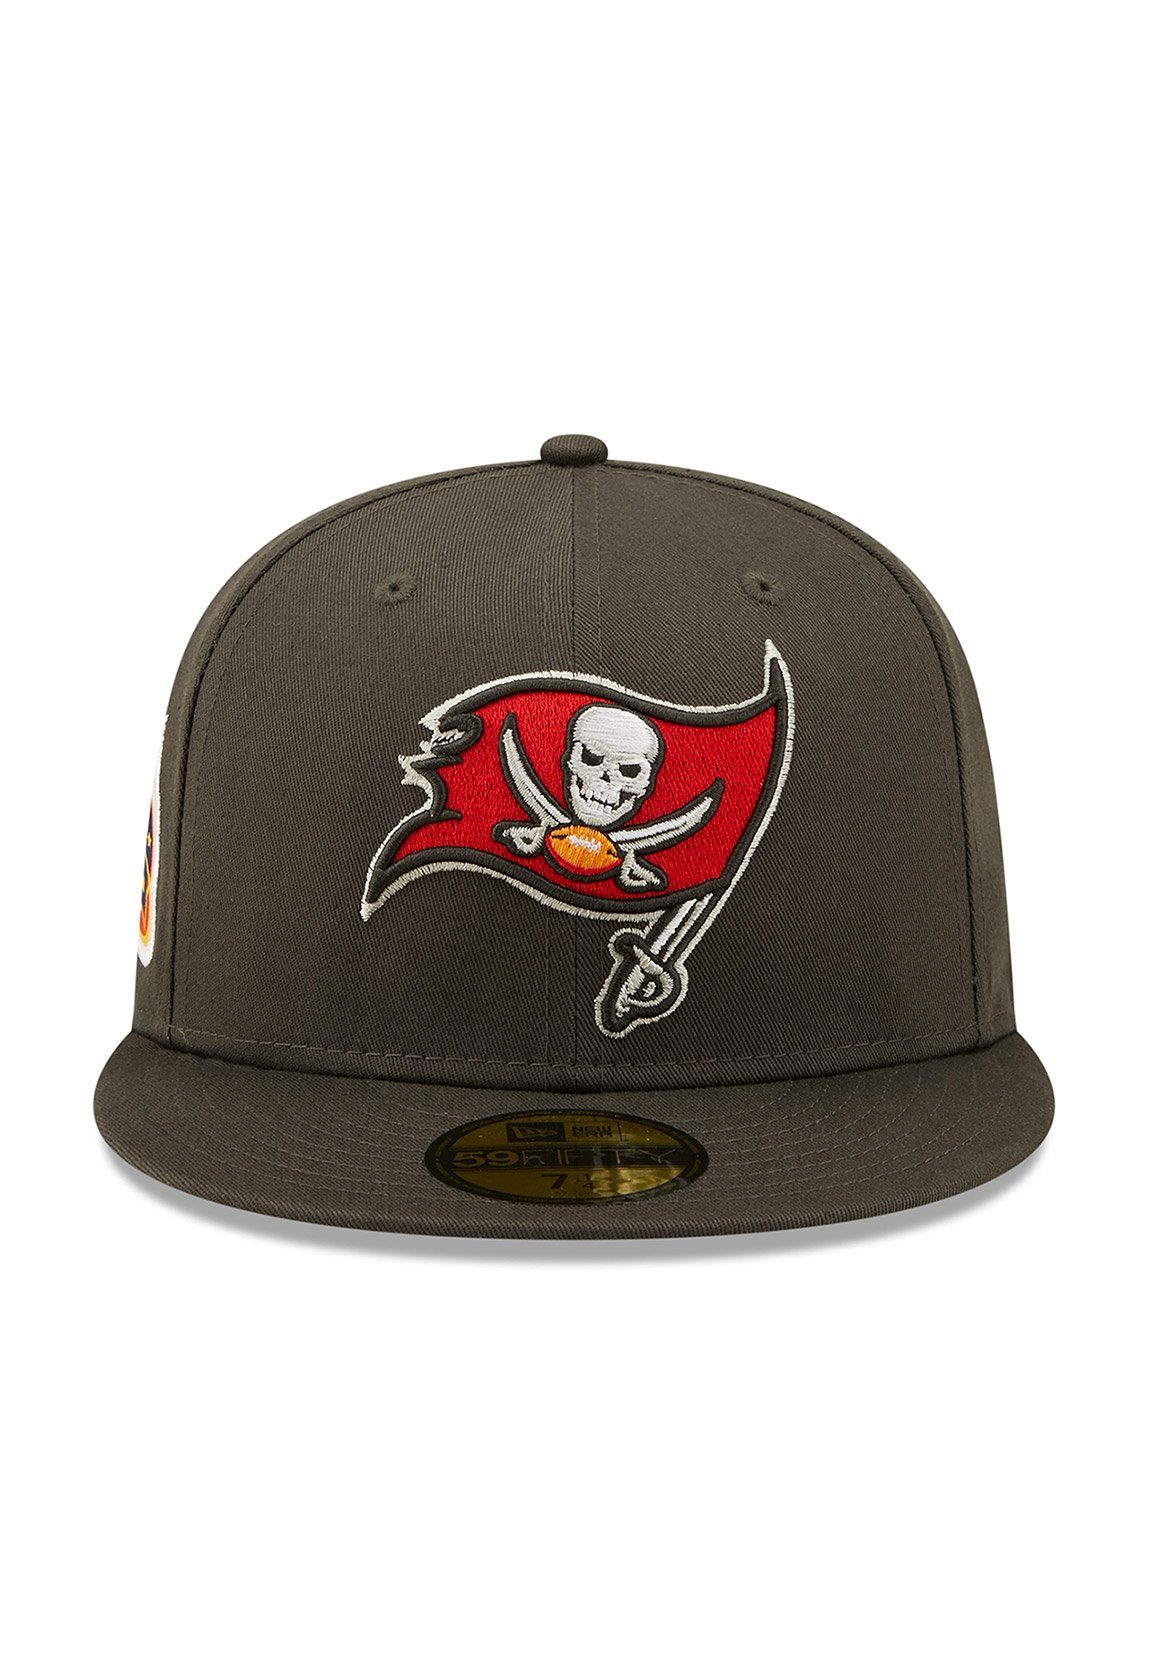 New Era Fitted Cap BAY Grau Side BUCCANEERS Patch 59Fifty Charcoal New TAMPA